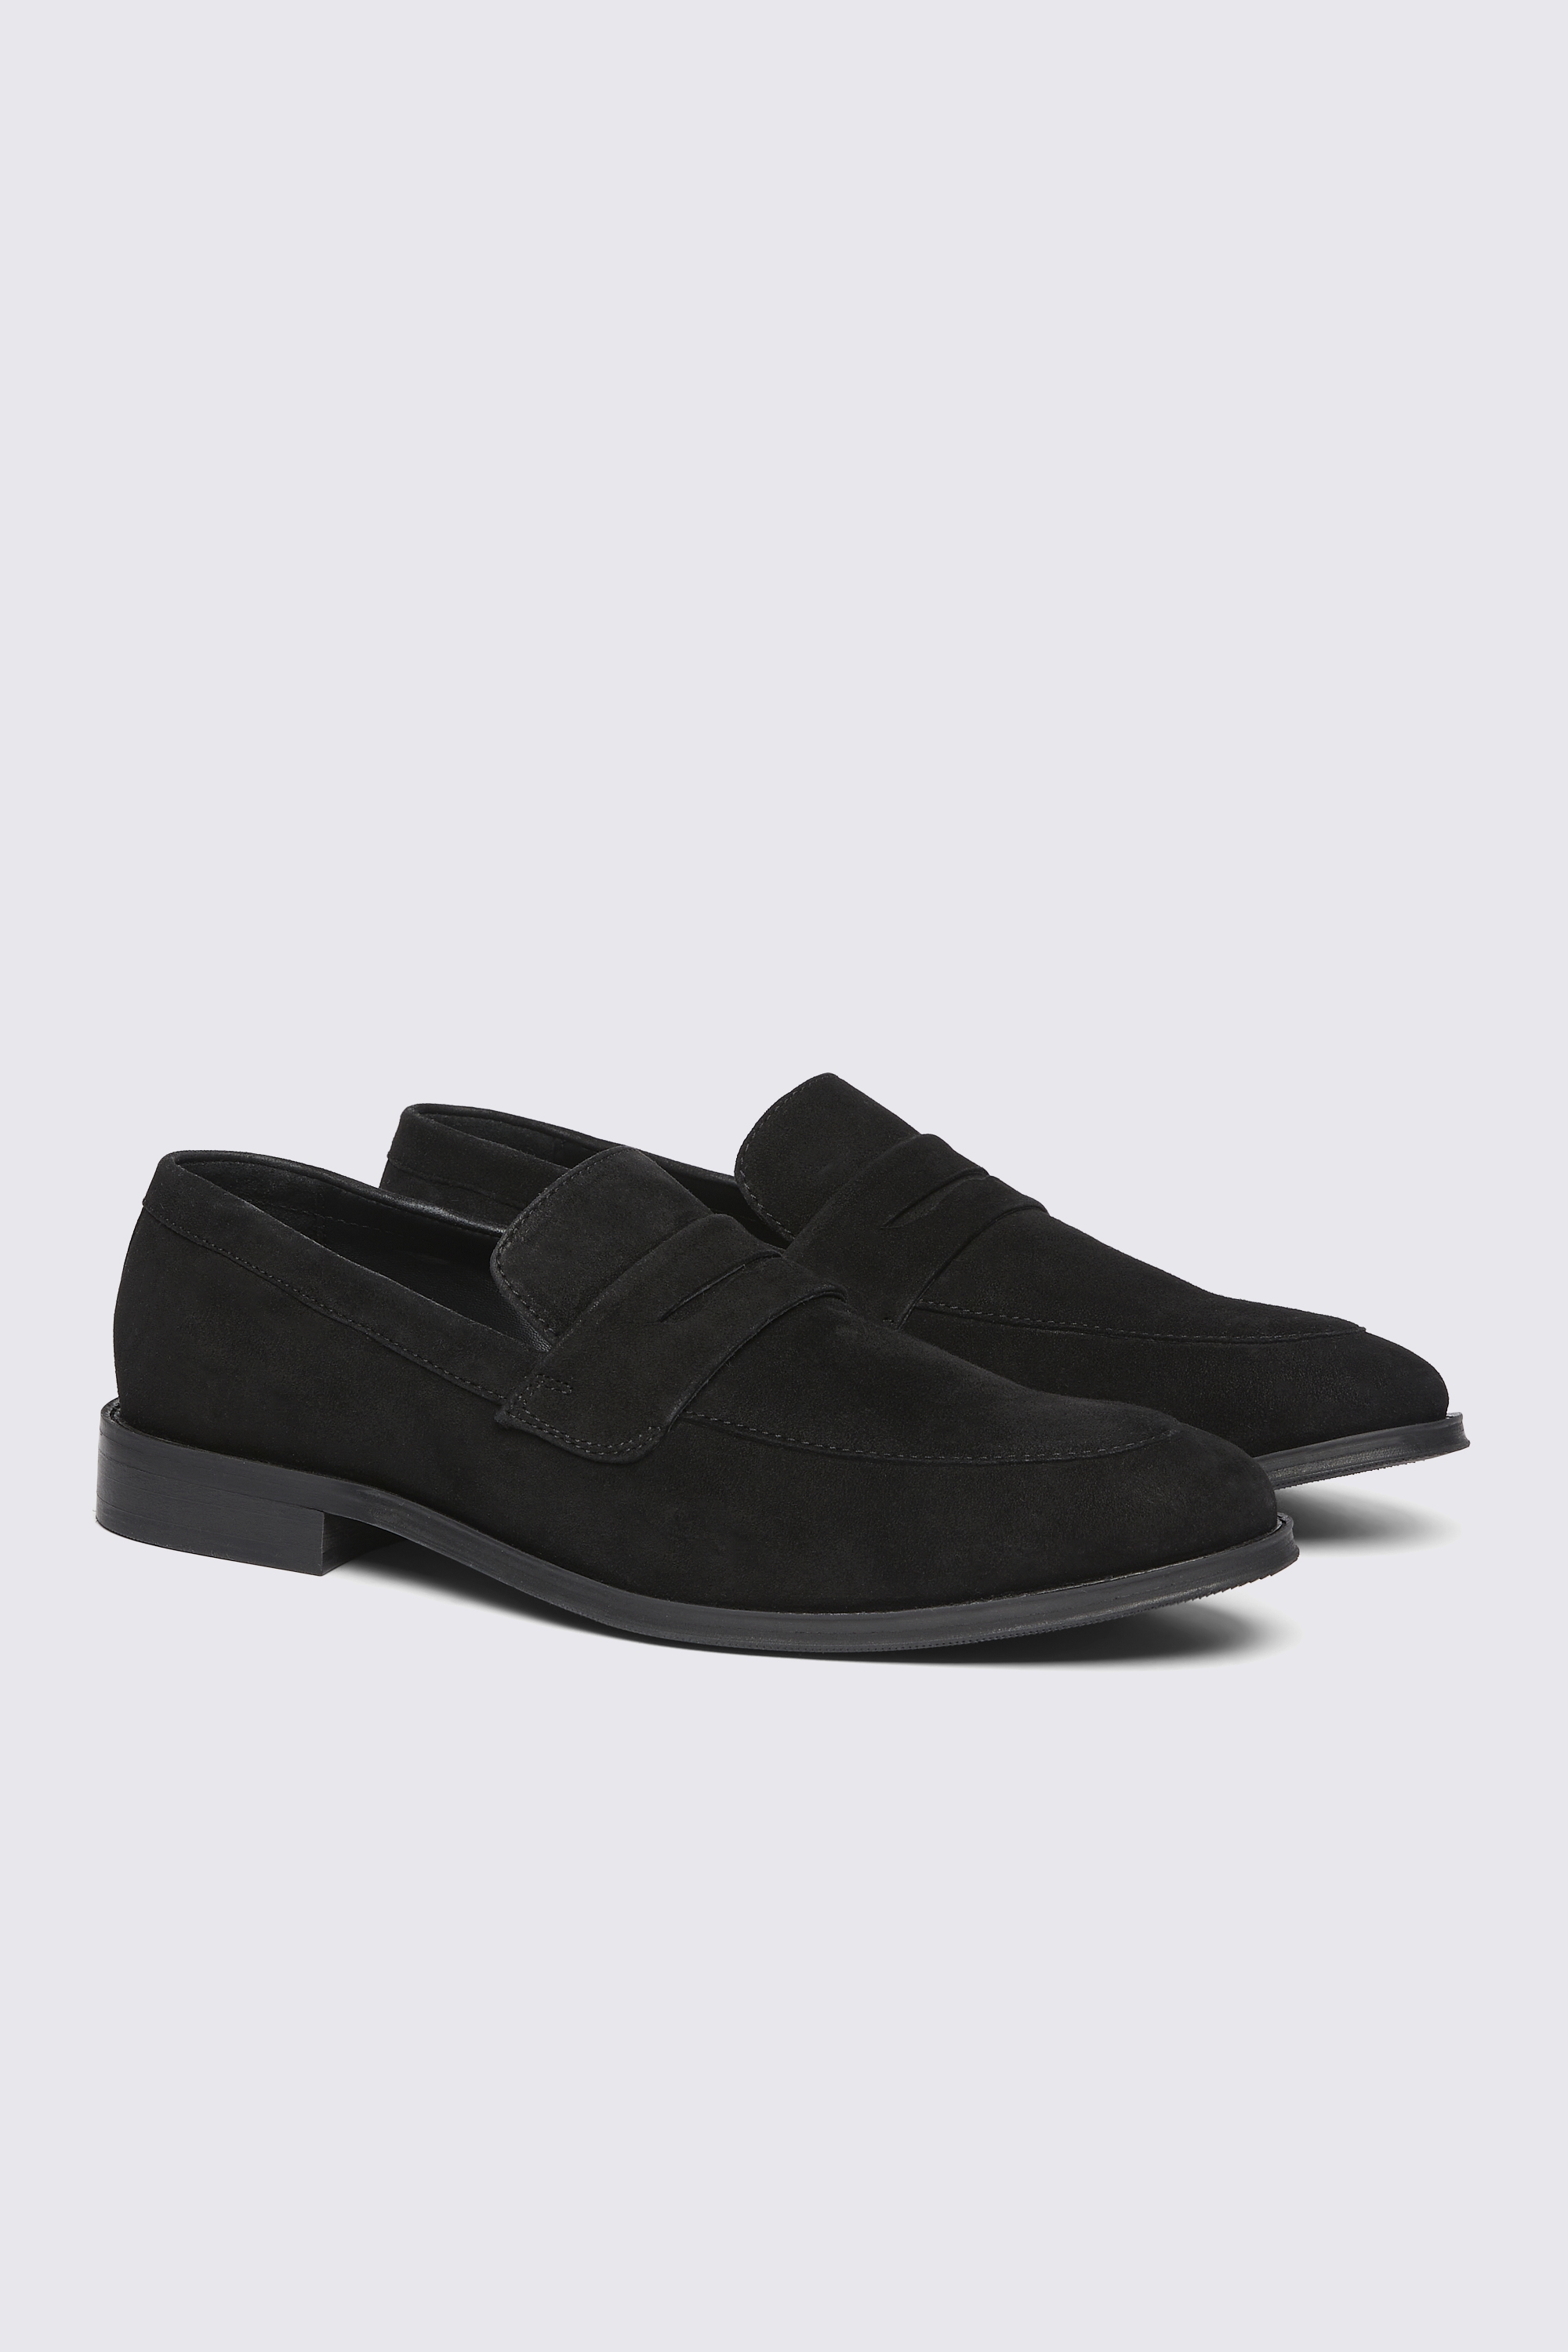 Black Suede Loafers | Buy Online at Moss